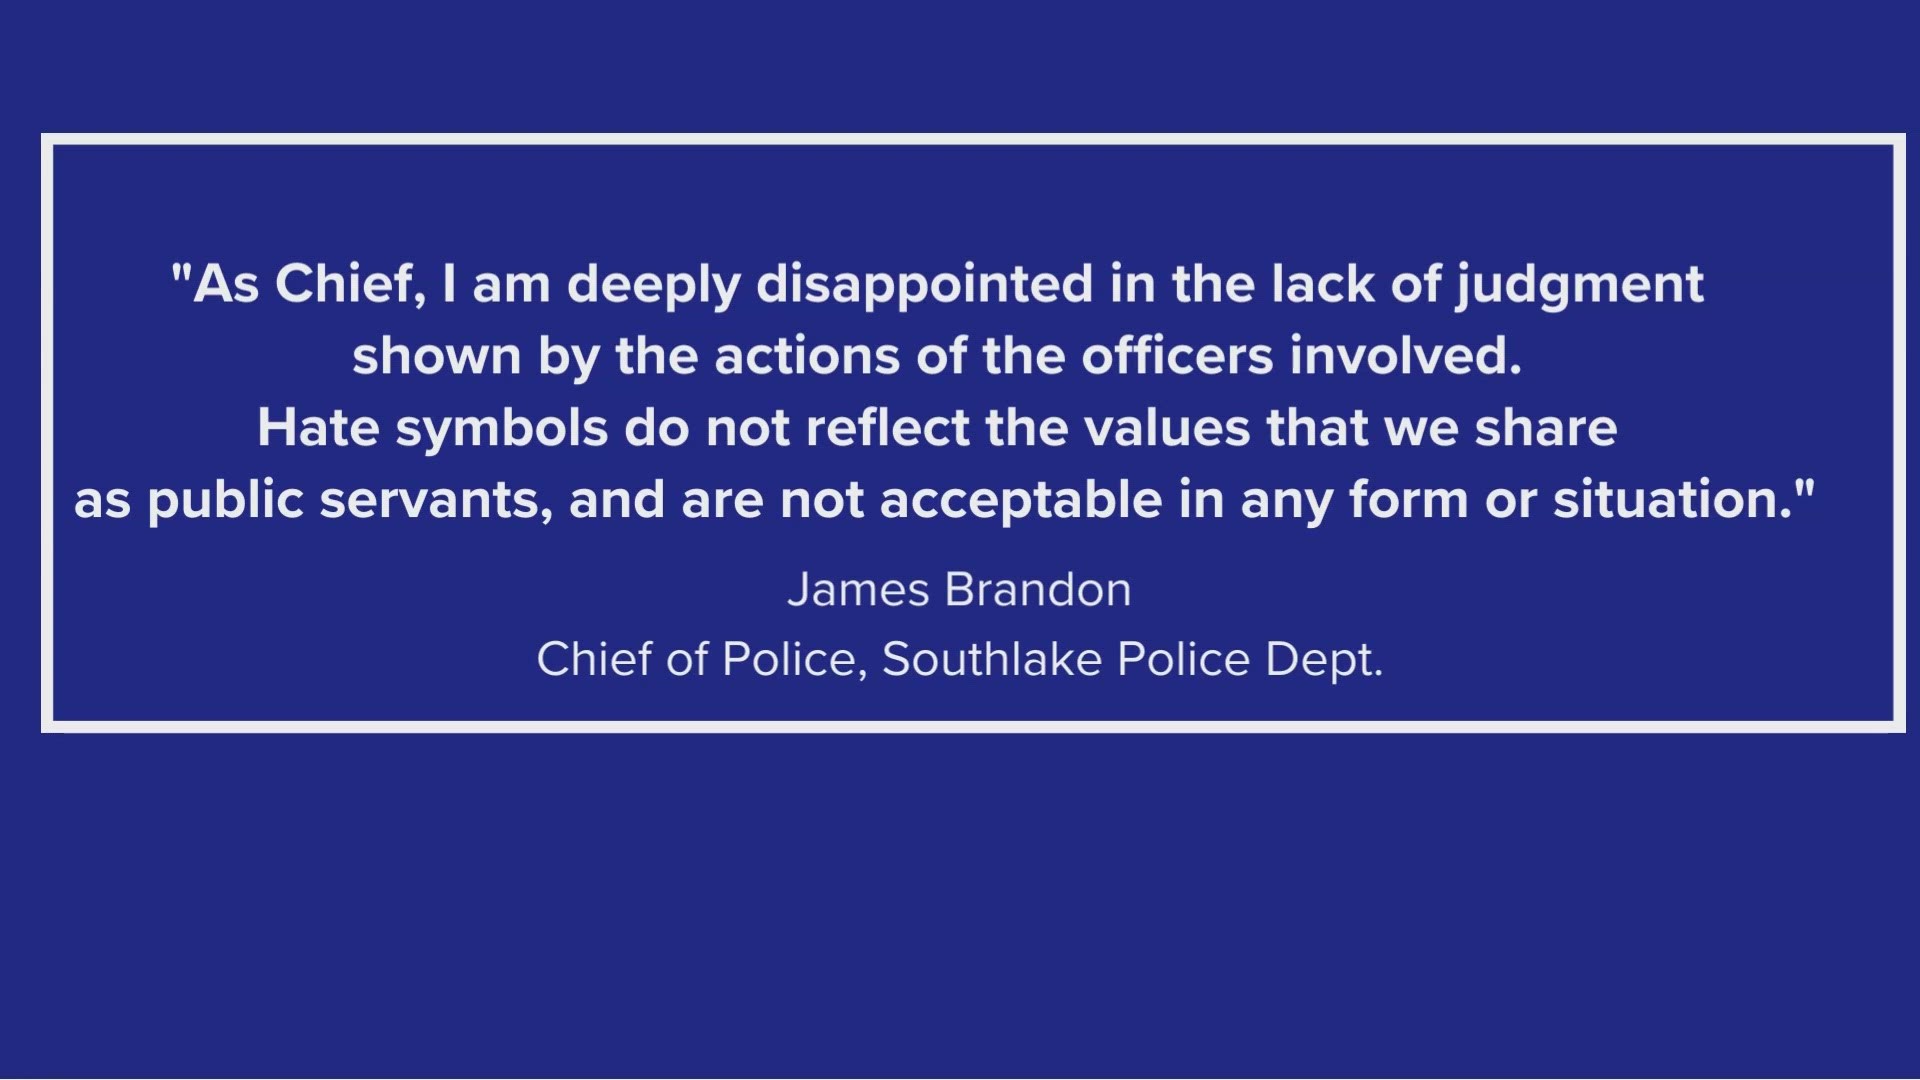 NOTE: The Dallas Holocaust and Human Rights Museum commended the actions of Southlake Police Chief James Brandon.